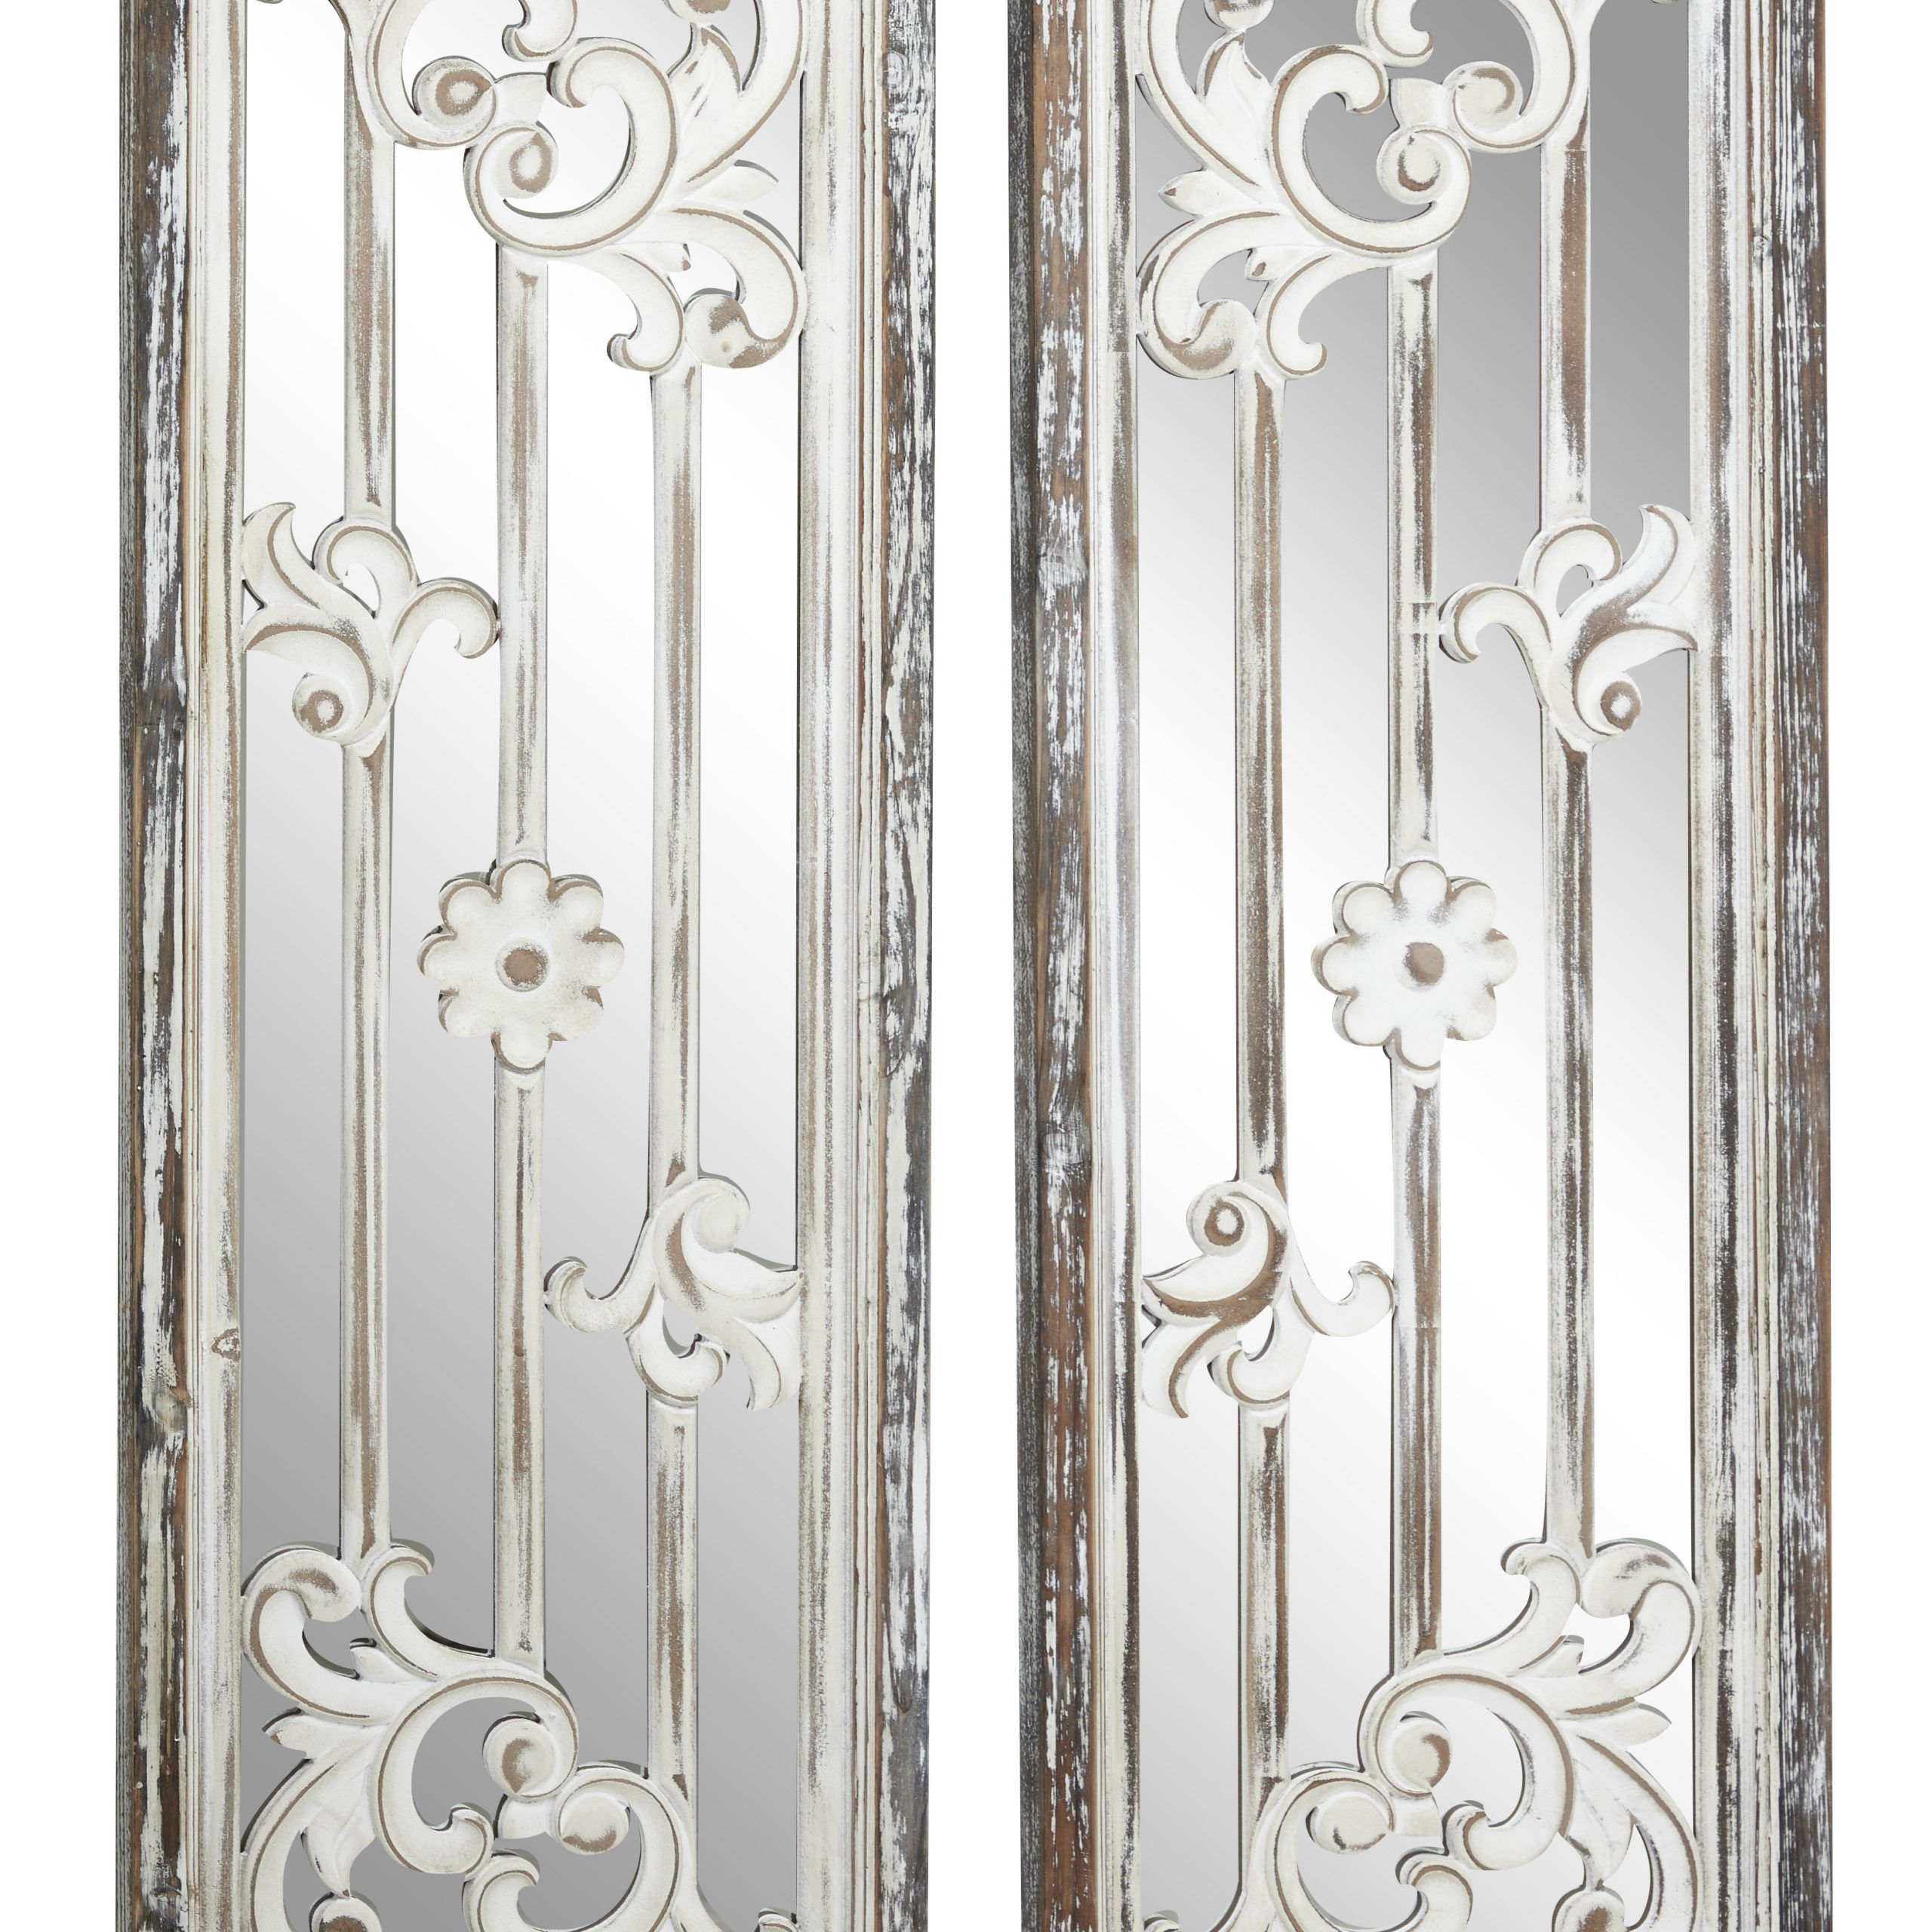 Decmode – Vintage Rectangular Wall Mirrors W/ Decorative Distressed Inside White Wall Mirrors (Photo 7 of 15)